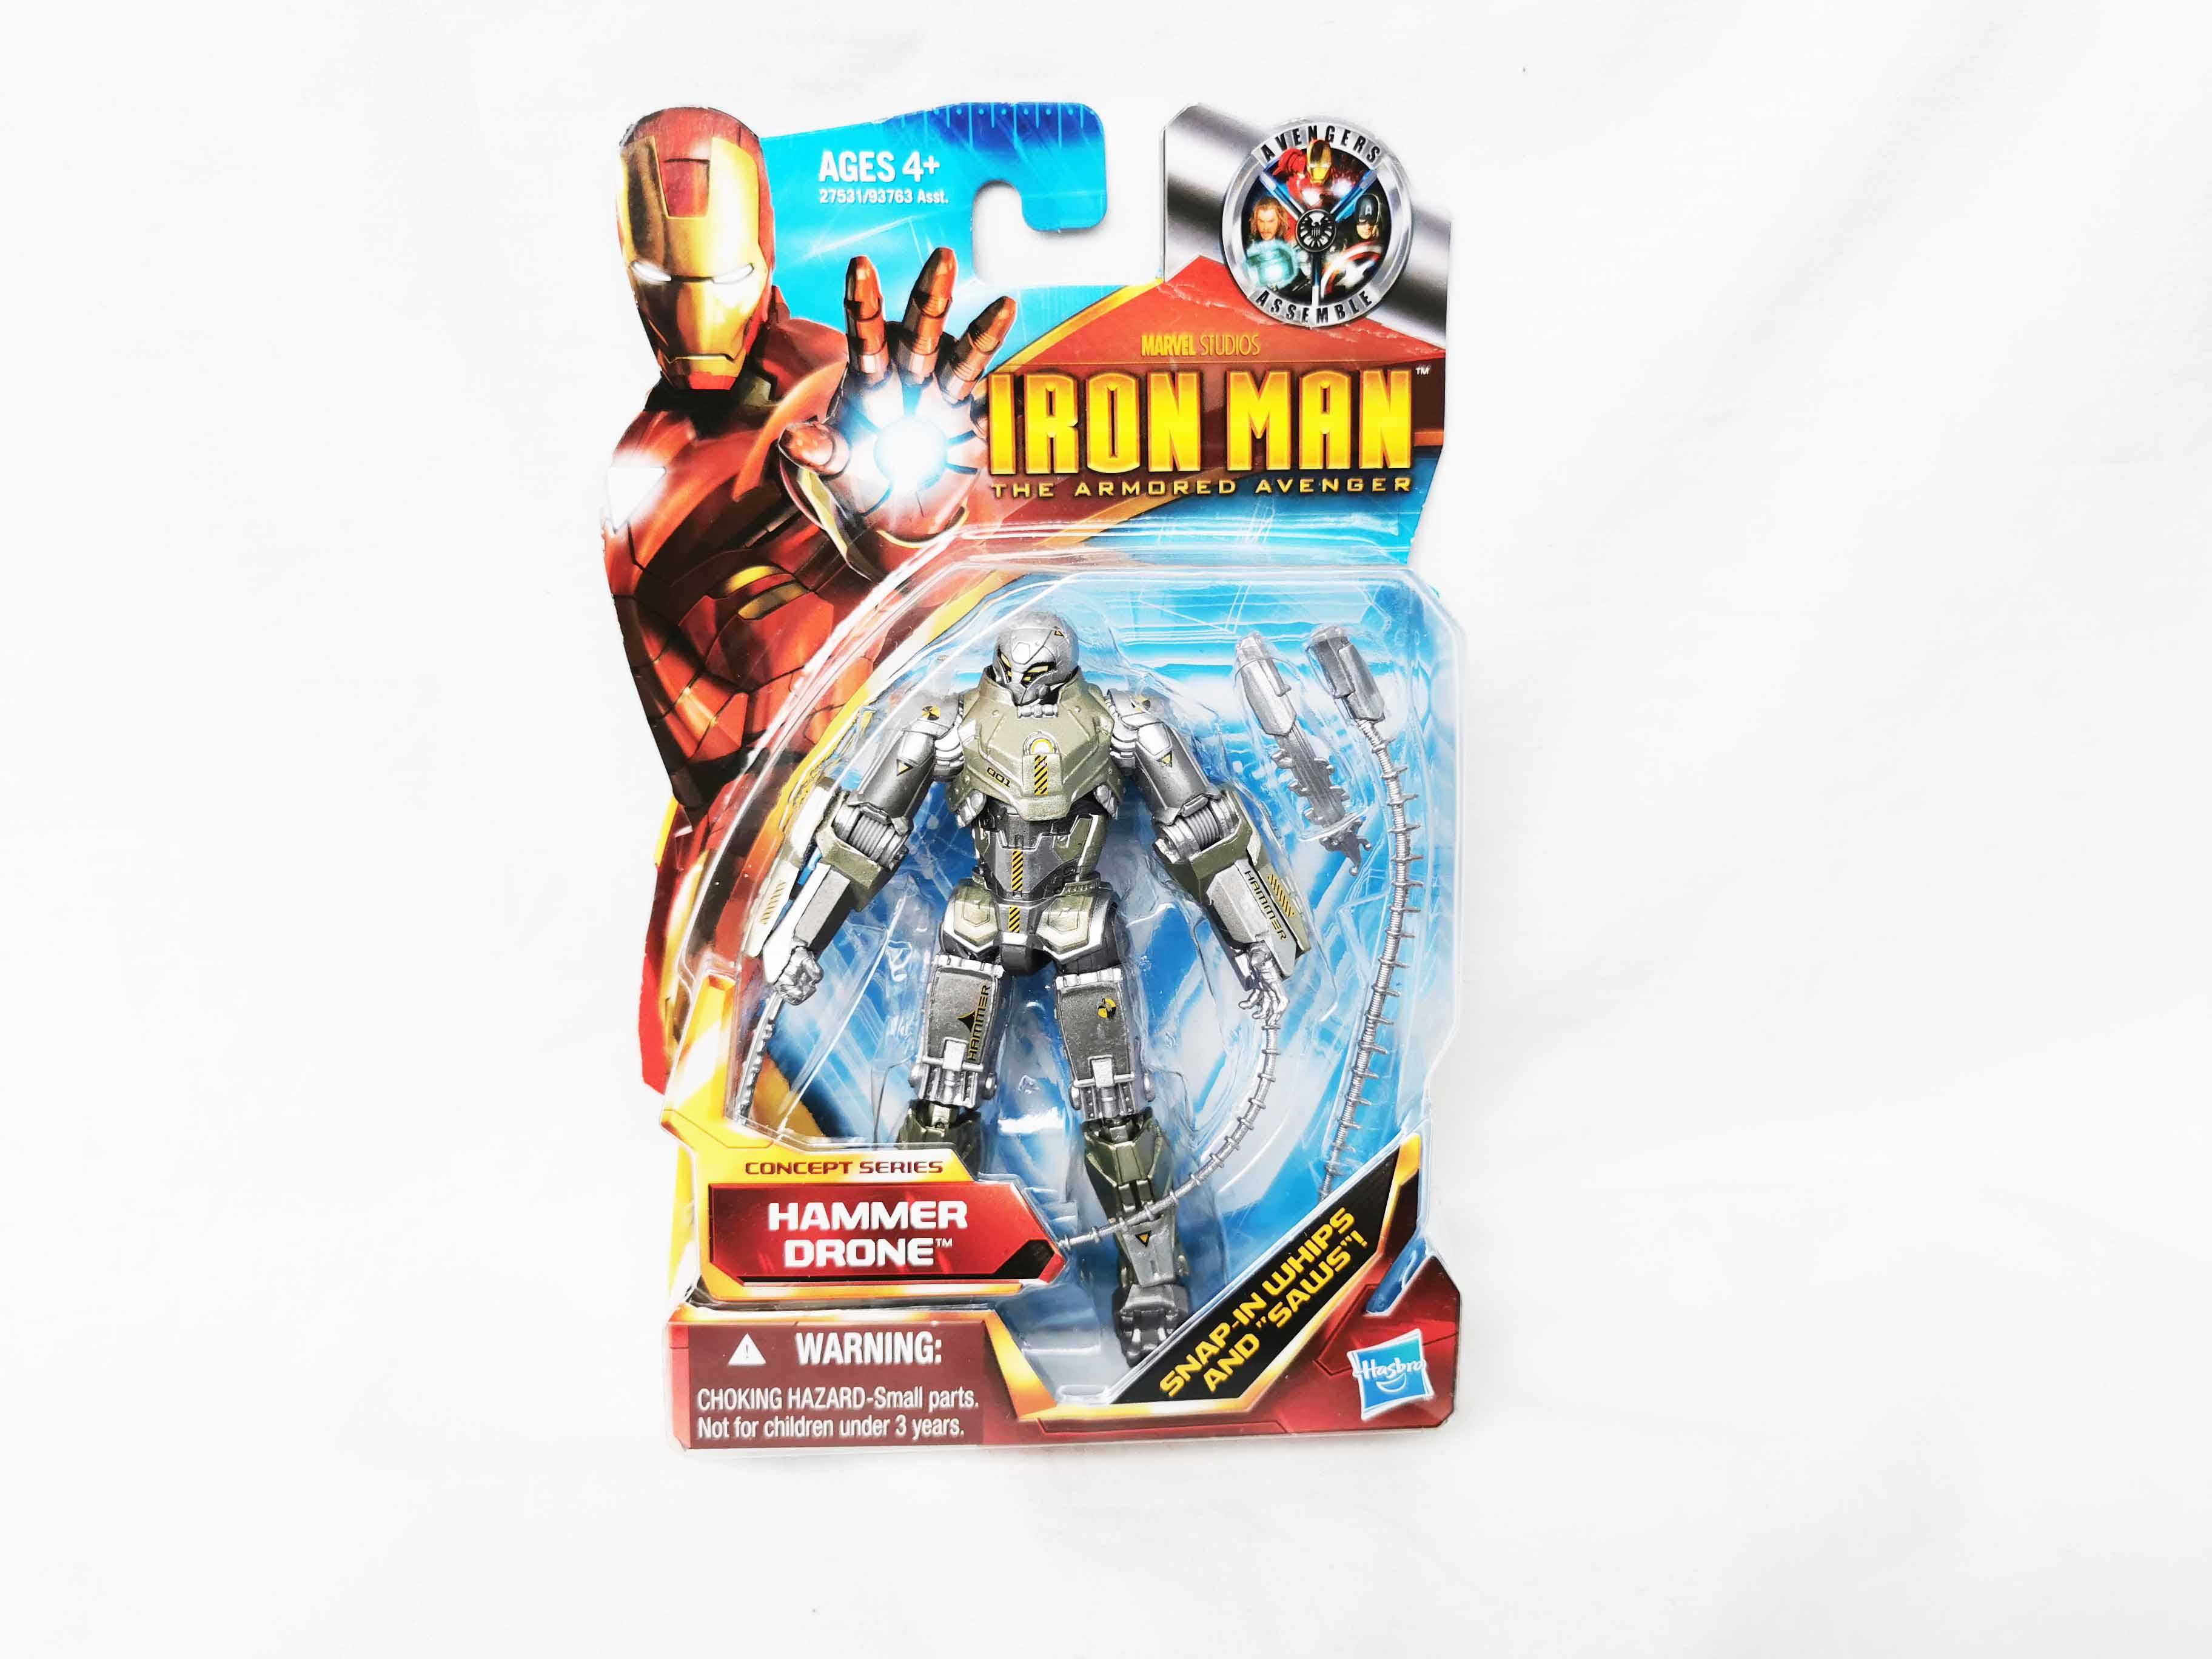 Hammer Drone Marvel Universe Carded Action Figure 3.75 scale Hasbro